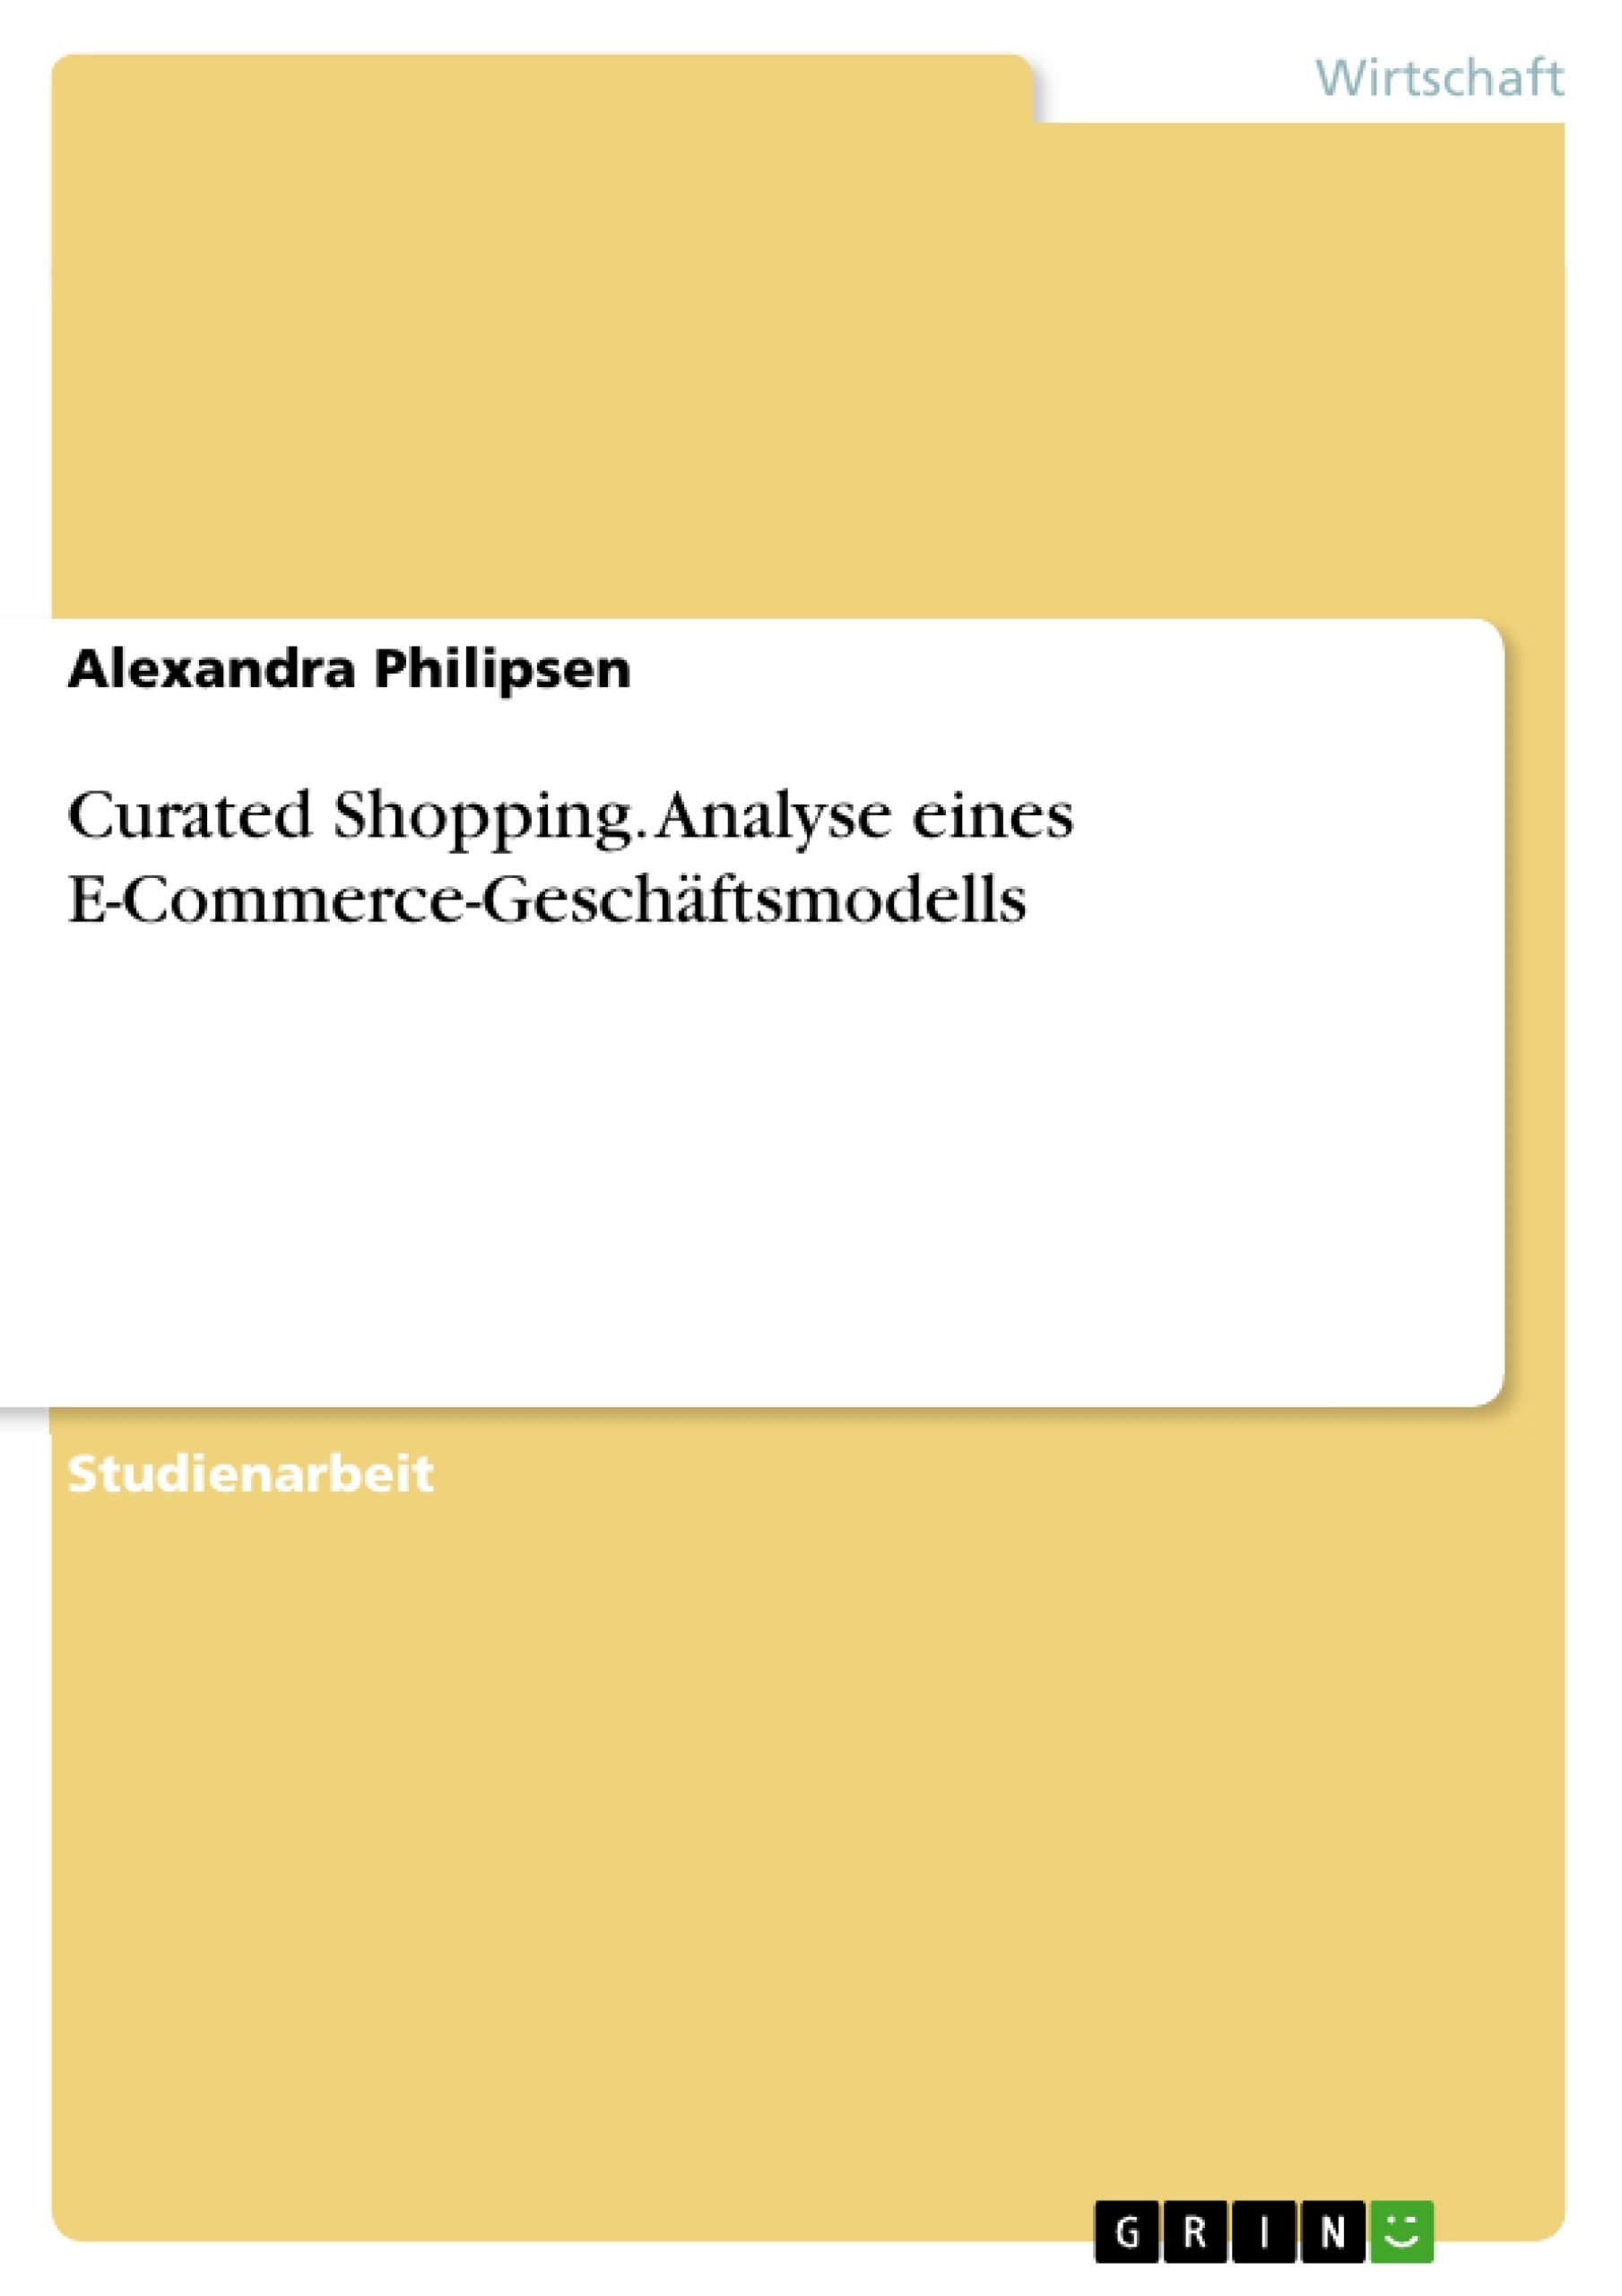 Título: Curated Shopping. Analyse eines E-Commerce-Geschäftsmodells